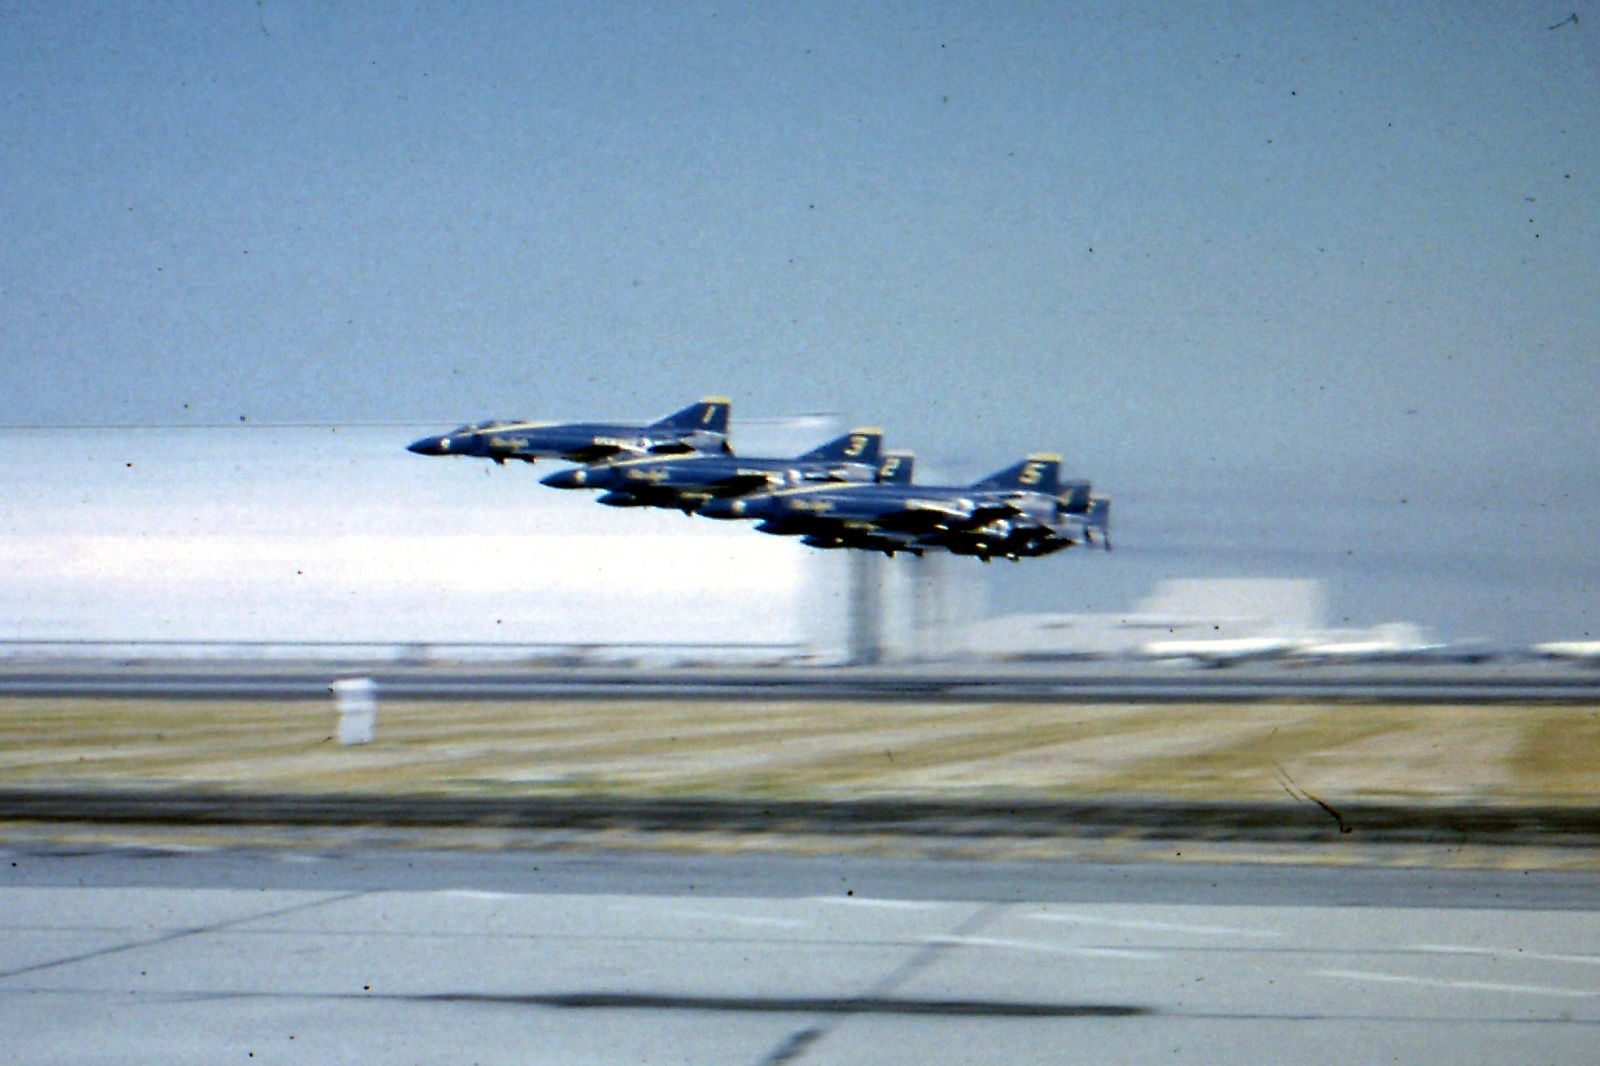 NAS Moffett Field, 1969. That’s a maneuver you don’t see any more. 